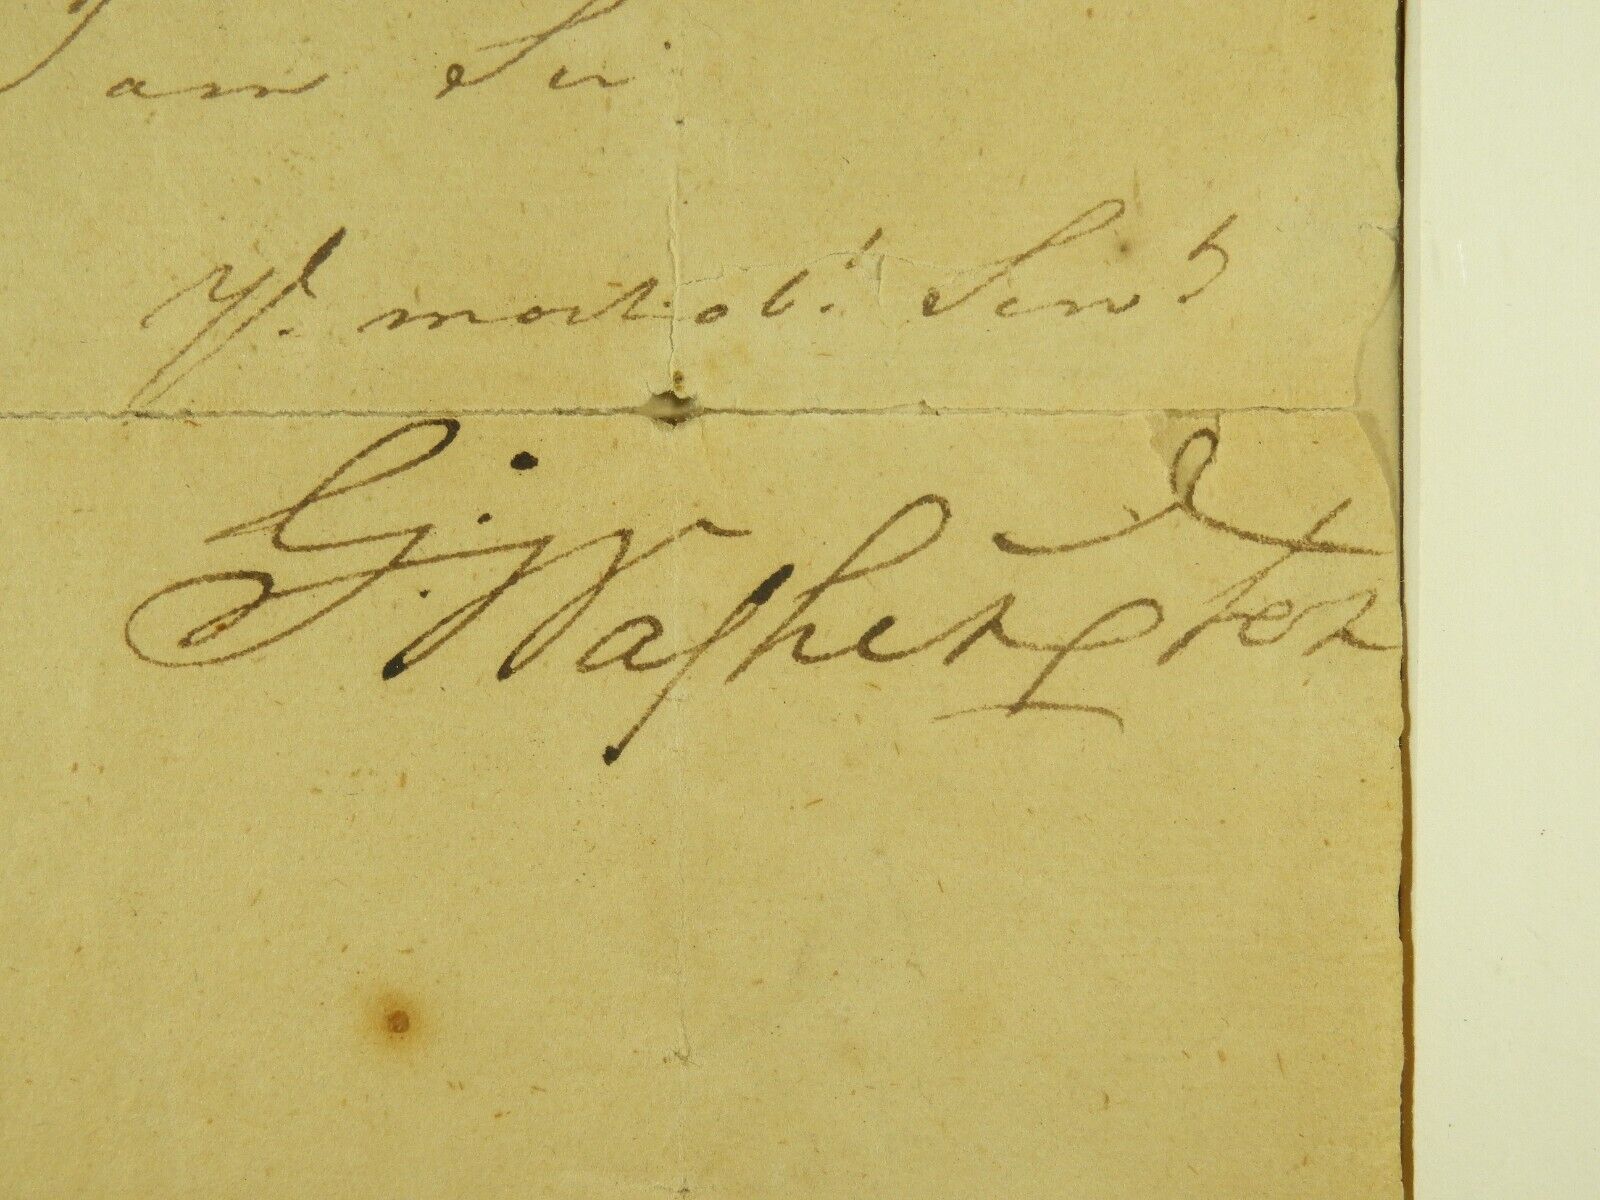 George Washington - Letter Signed - Secures West Point After B. Arnold's Treason